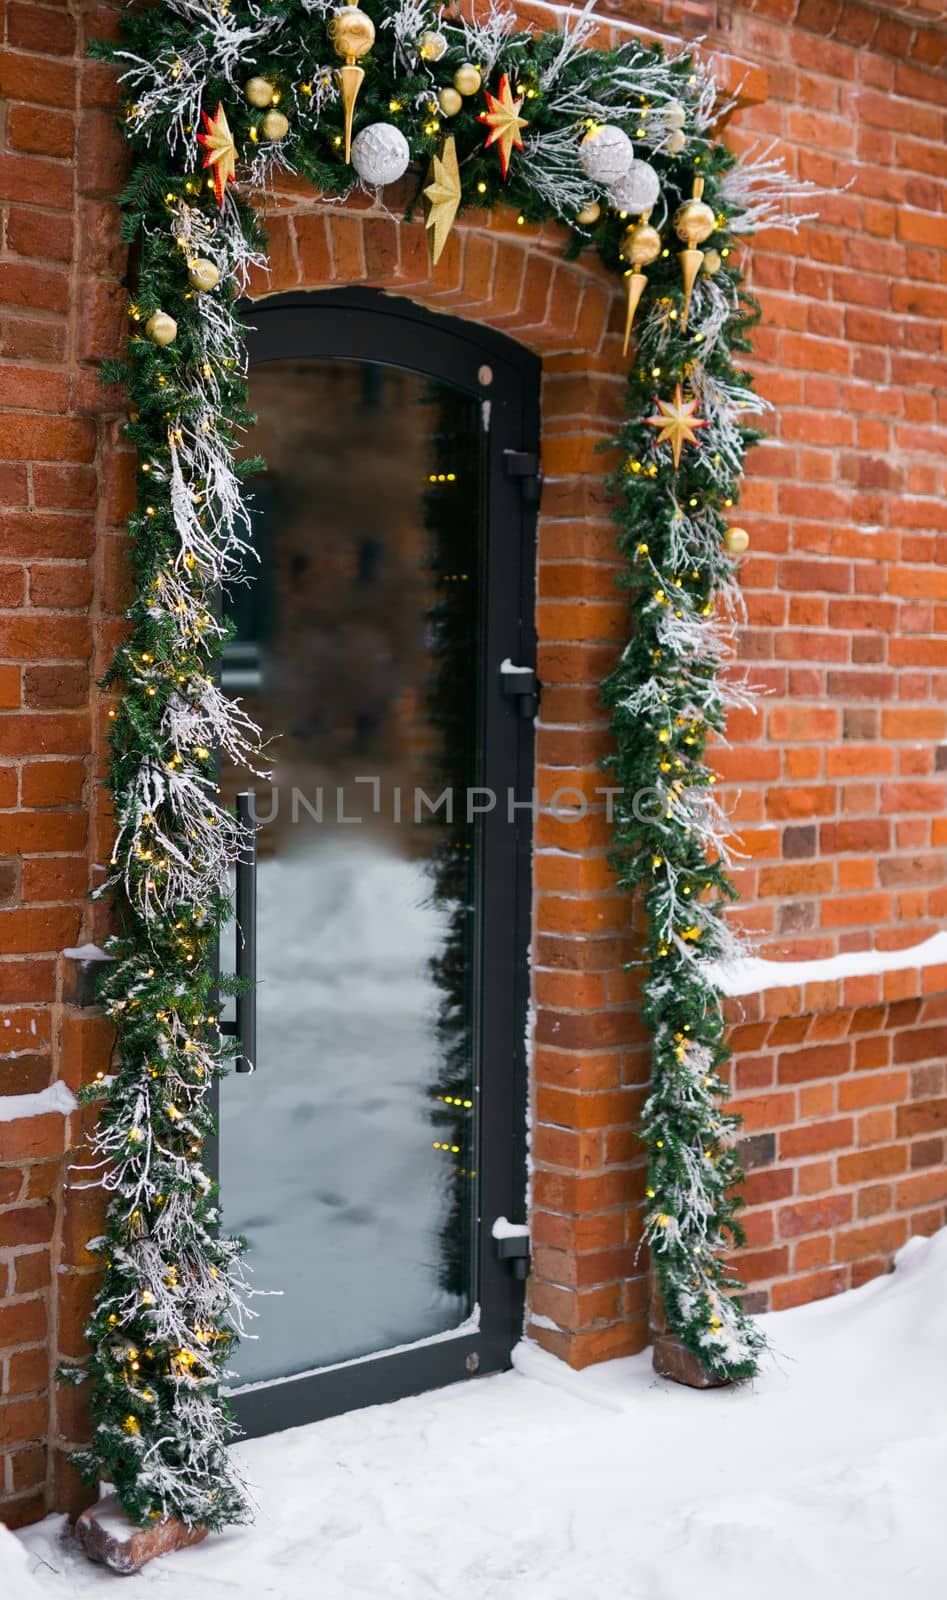 Stylish christmas fir branches with red baubles and sparkling garland on front of door at holiday market or restaurant in city street. Winter christmas street decor